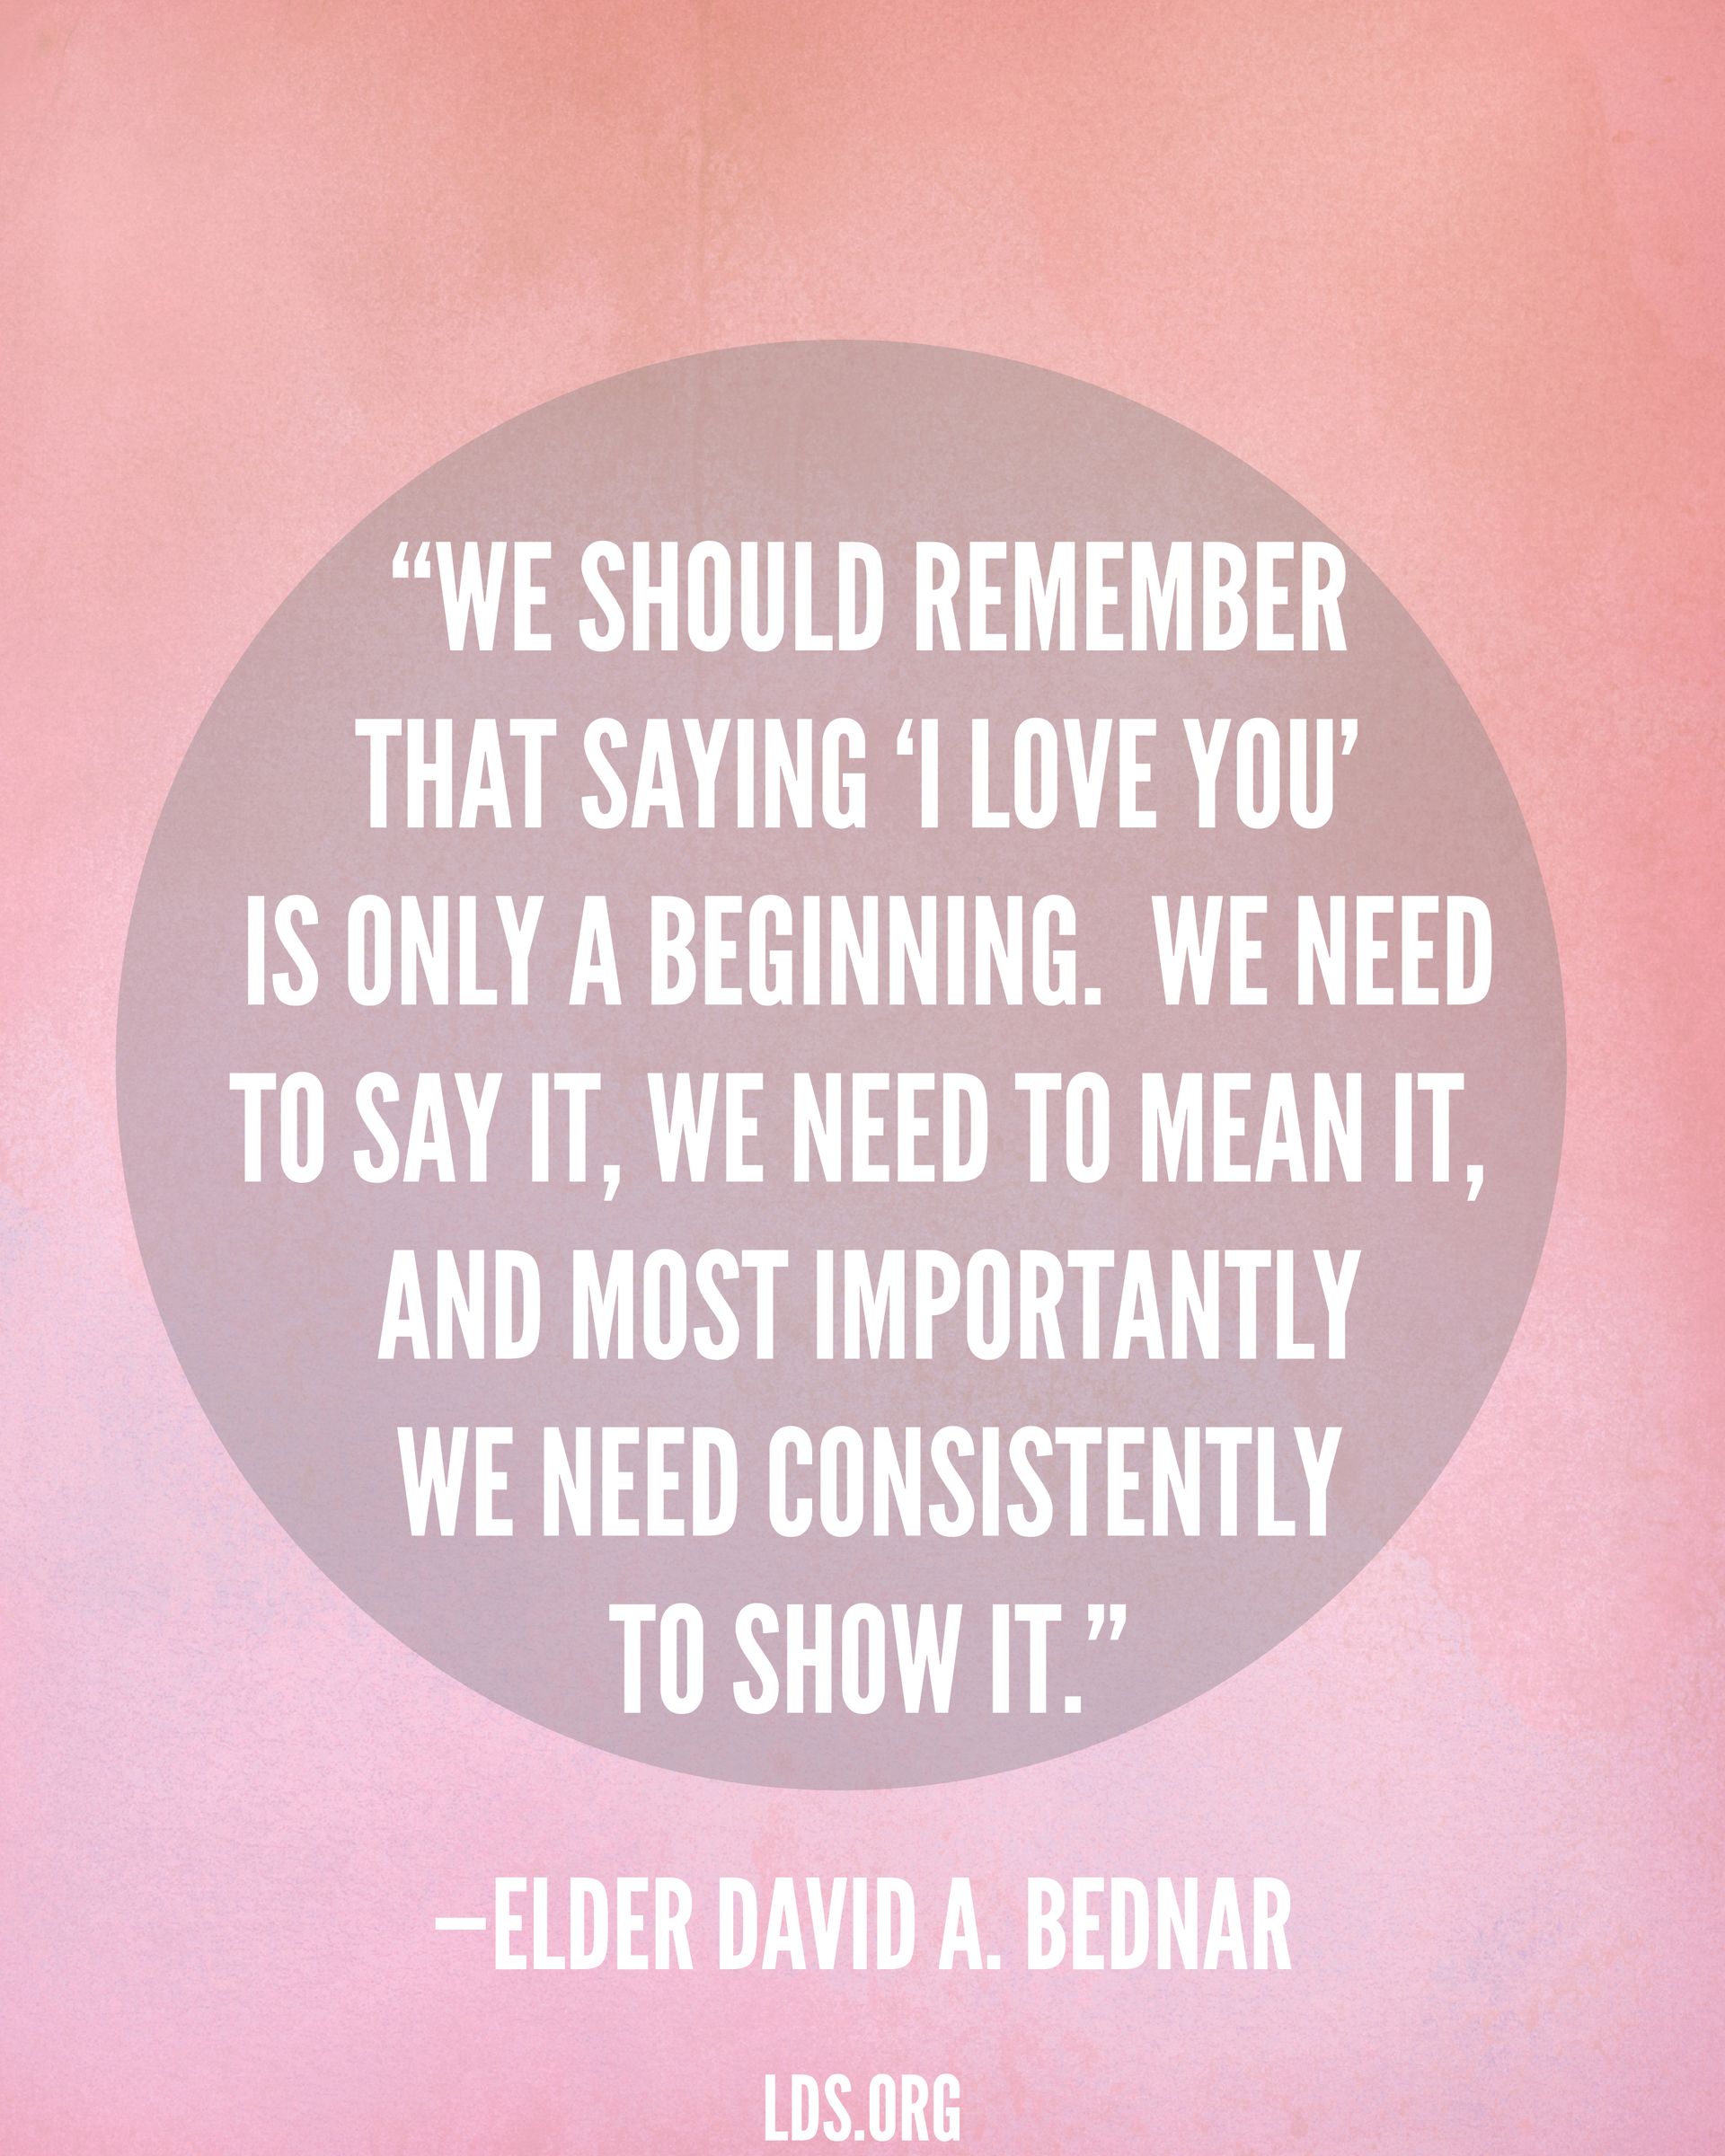 “We should remember that saying ‘I love you’ is only a beginning. We need to say it, we need to mean it, and most importantly we need consistently to show it.”—Elder David A. Bednar, “More Diligent and Concerned at Home”